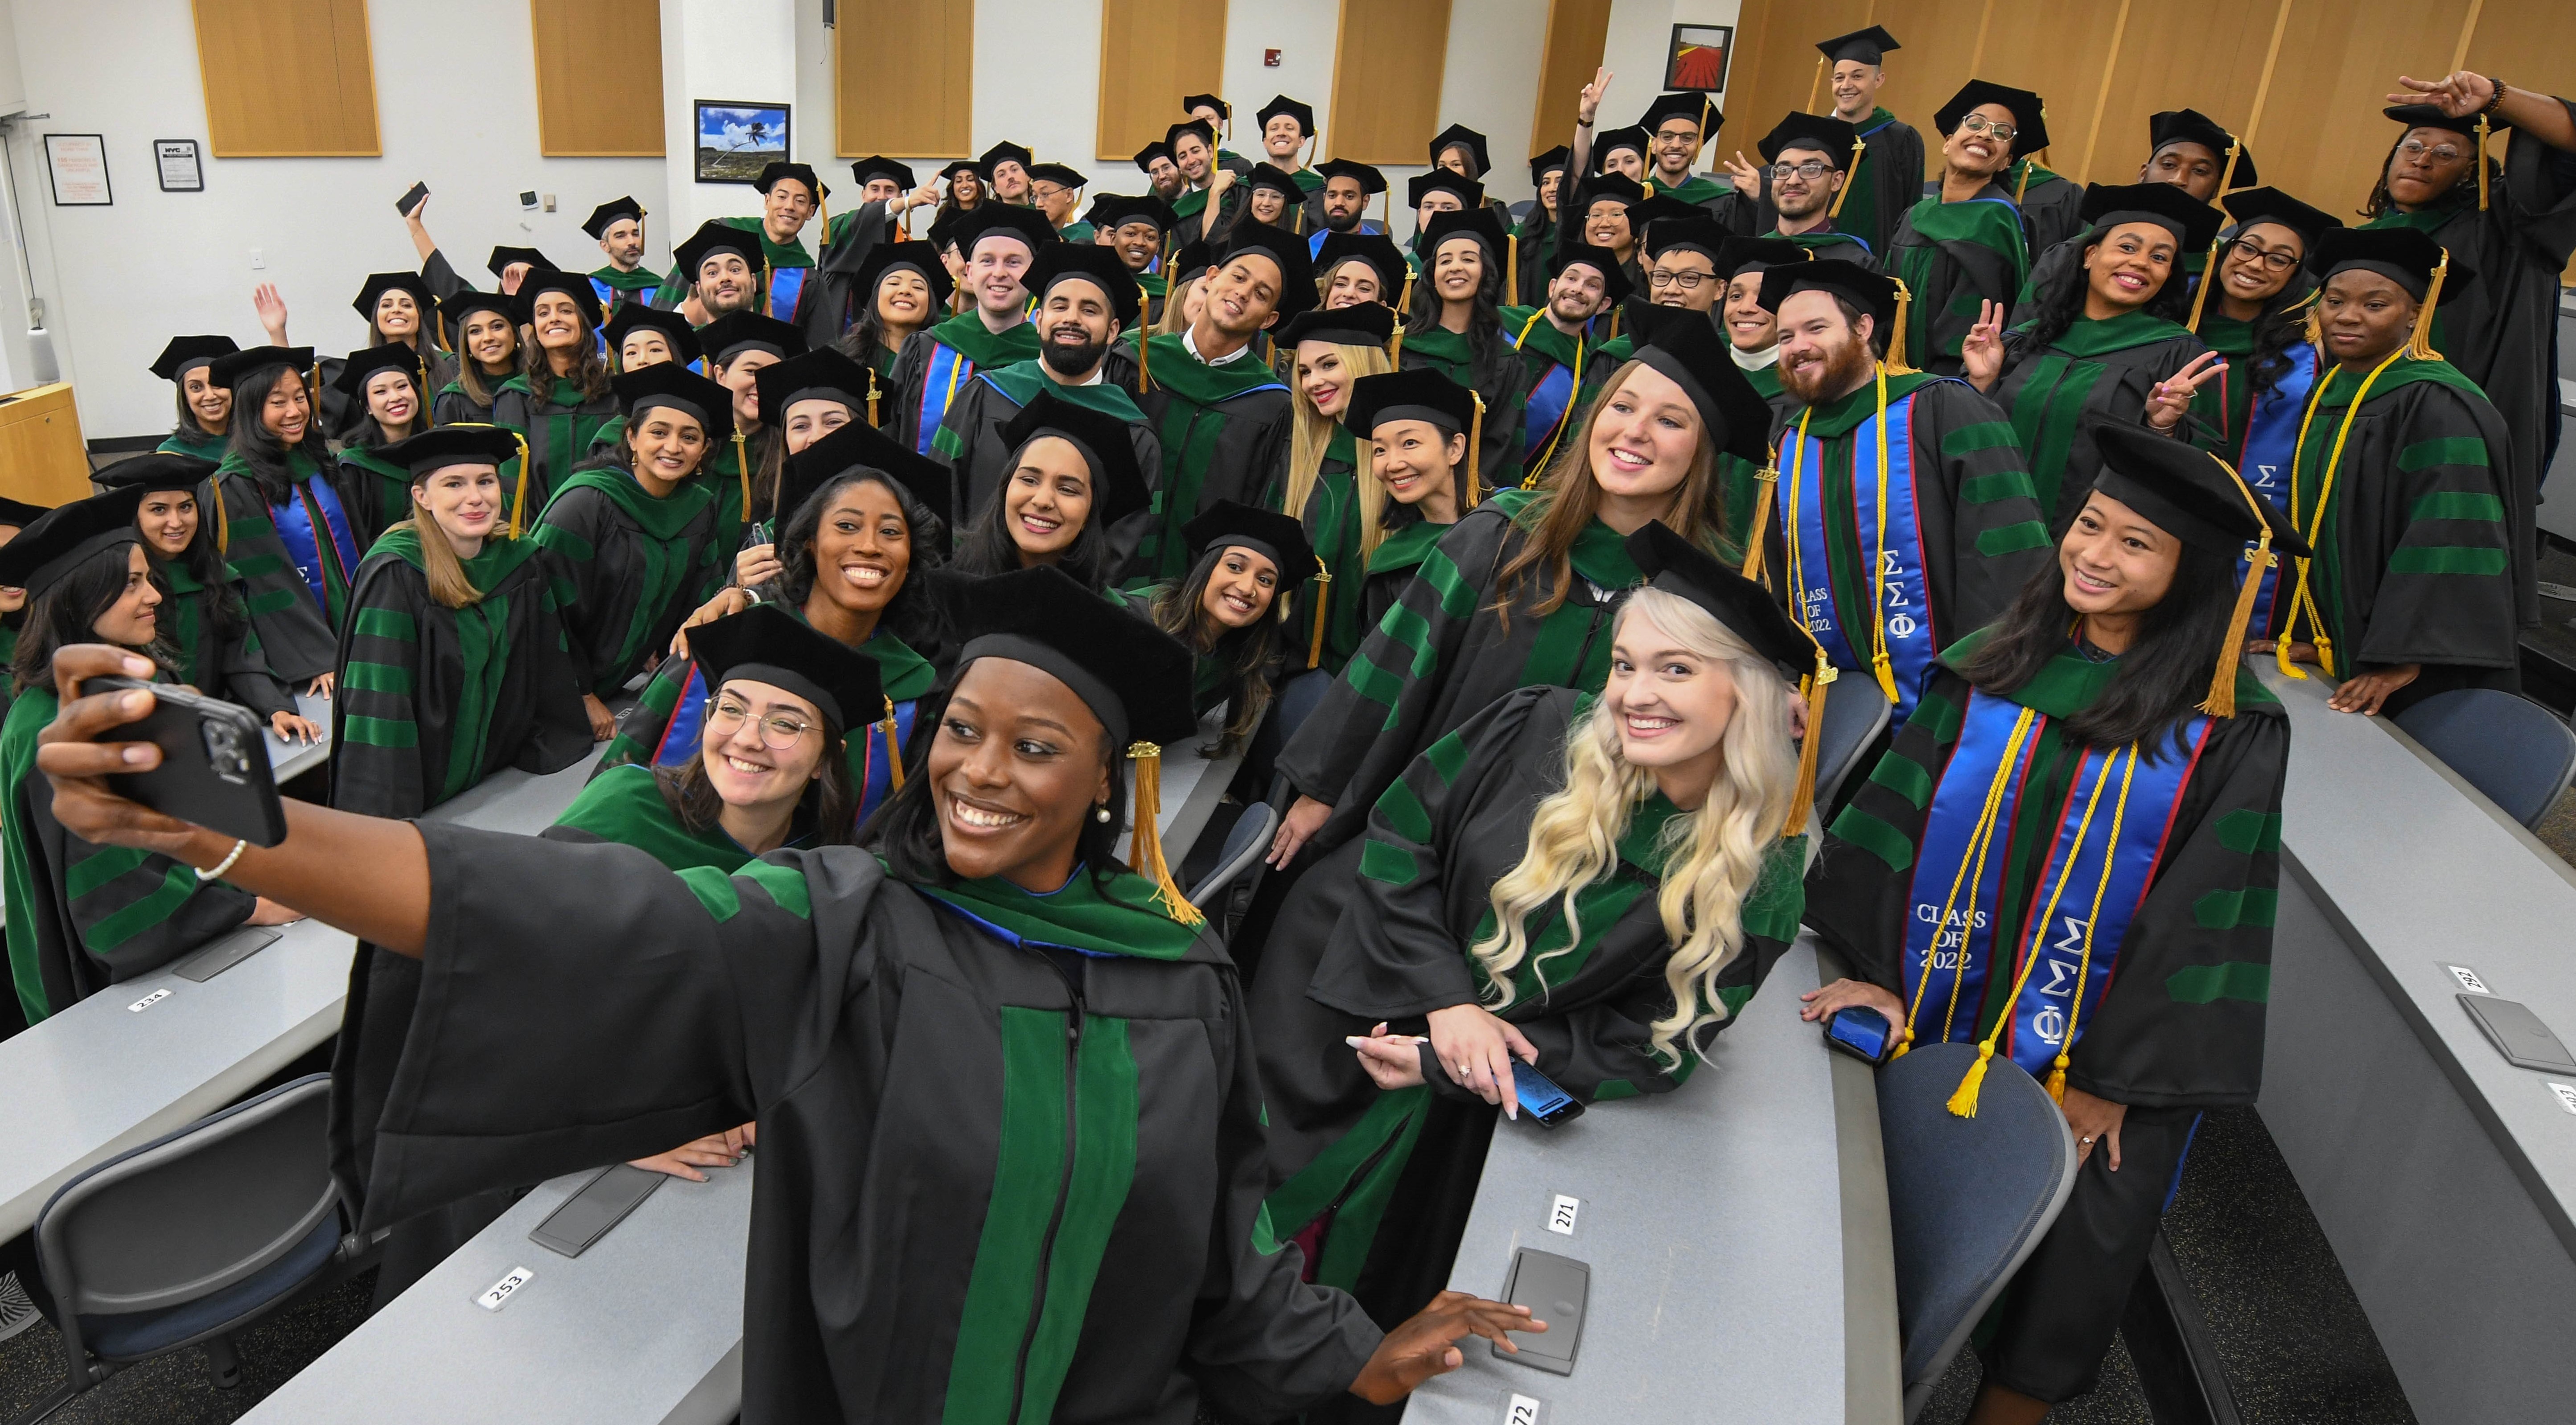 graduates standing in lecture hall taking a group selfie in caps and gowns